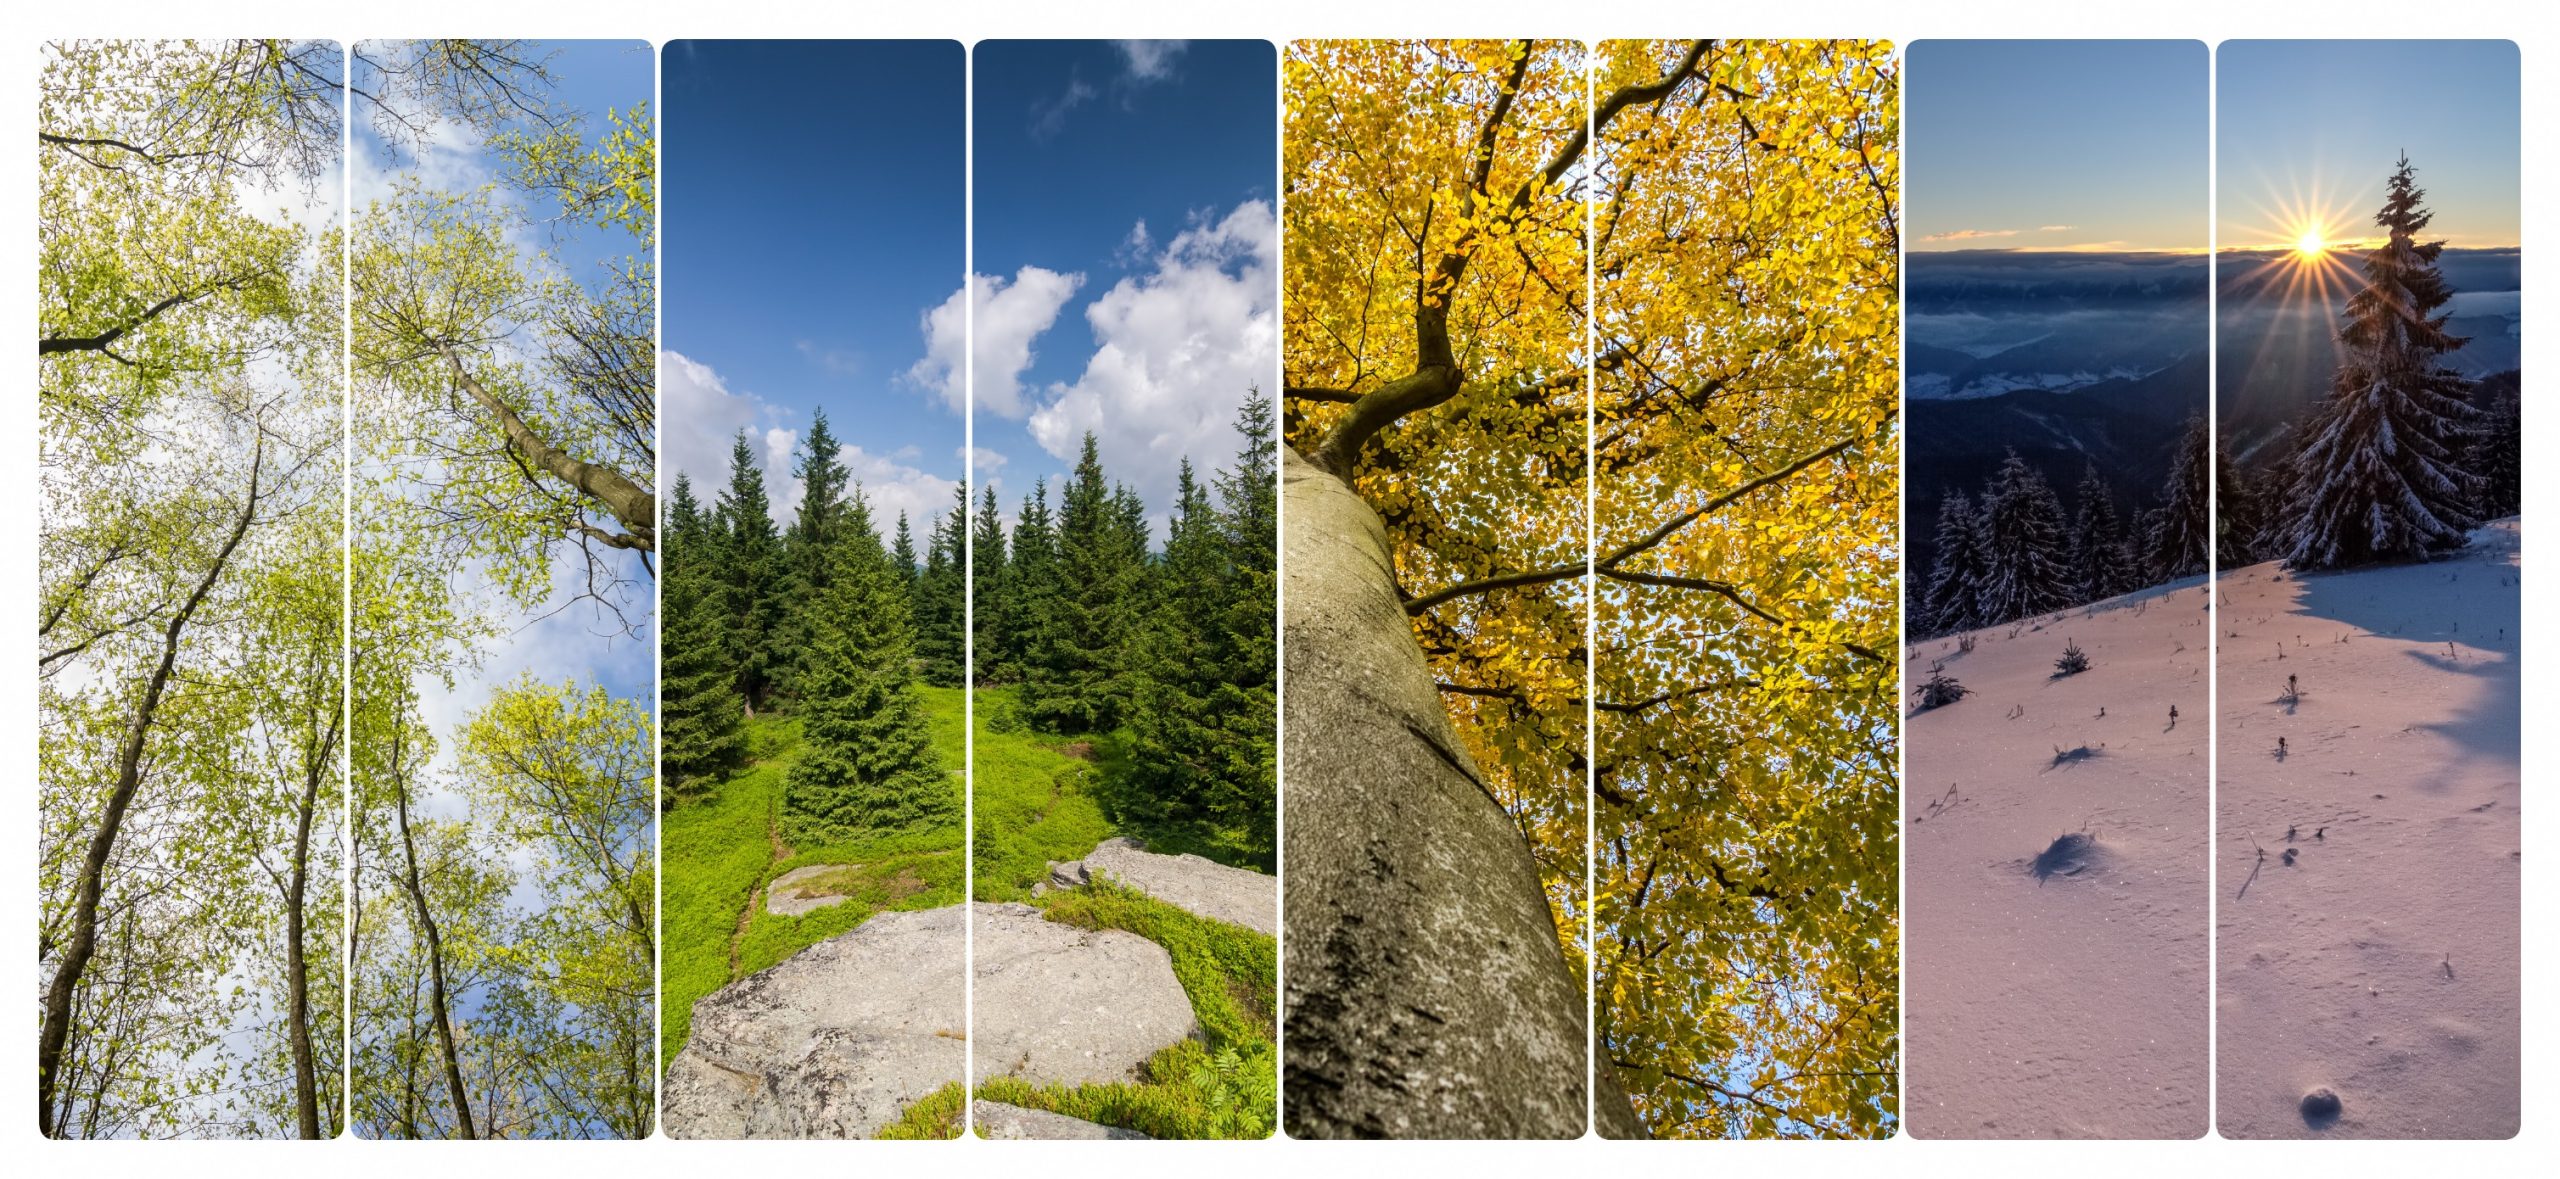 Four seasons nature scene: spring, summer, fall, winter landscapes.